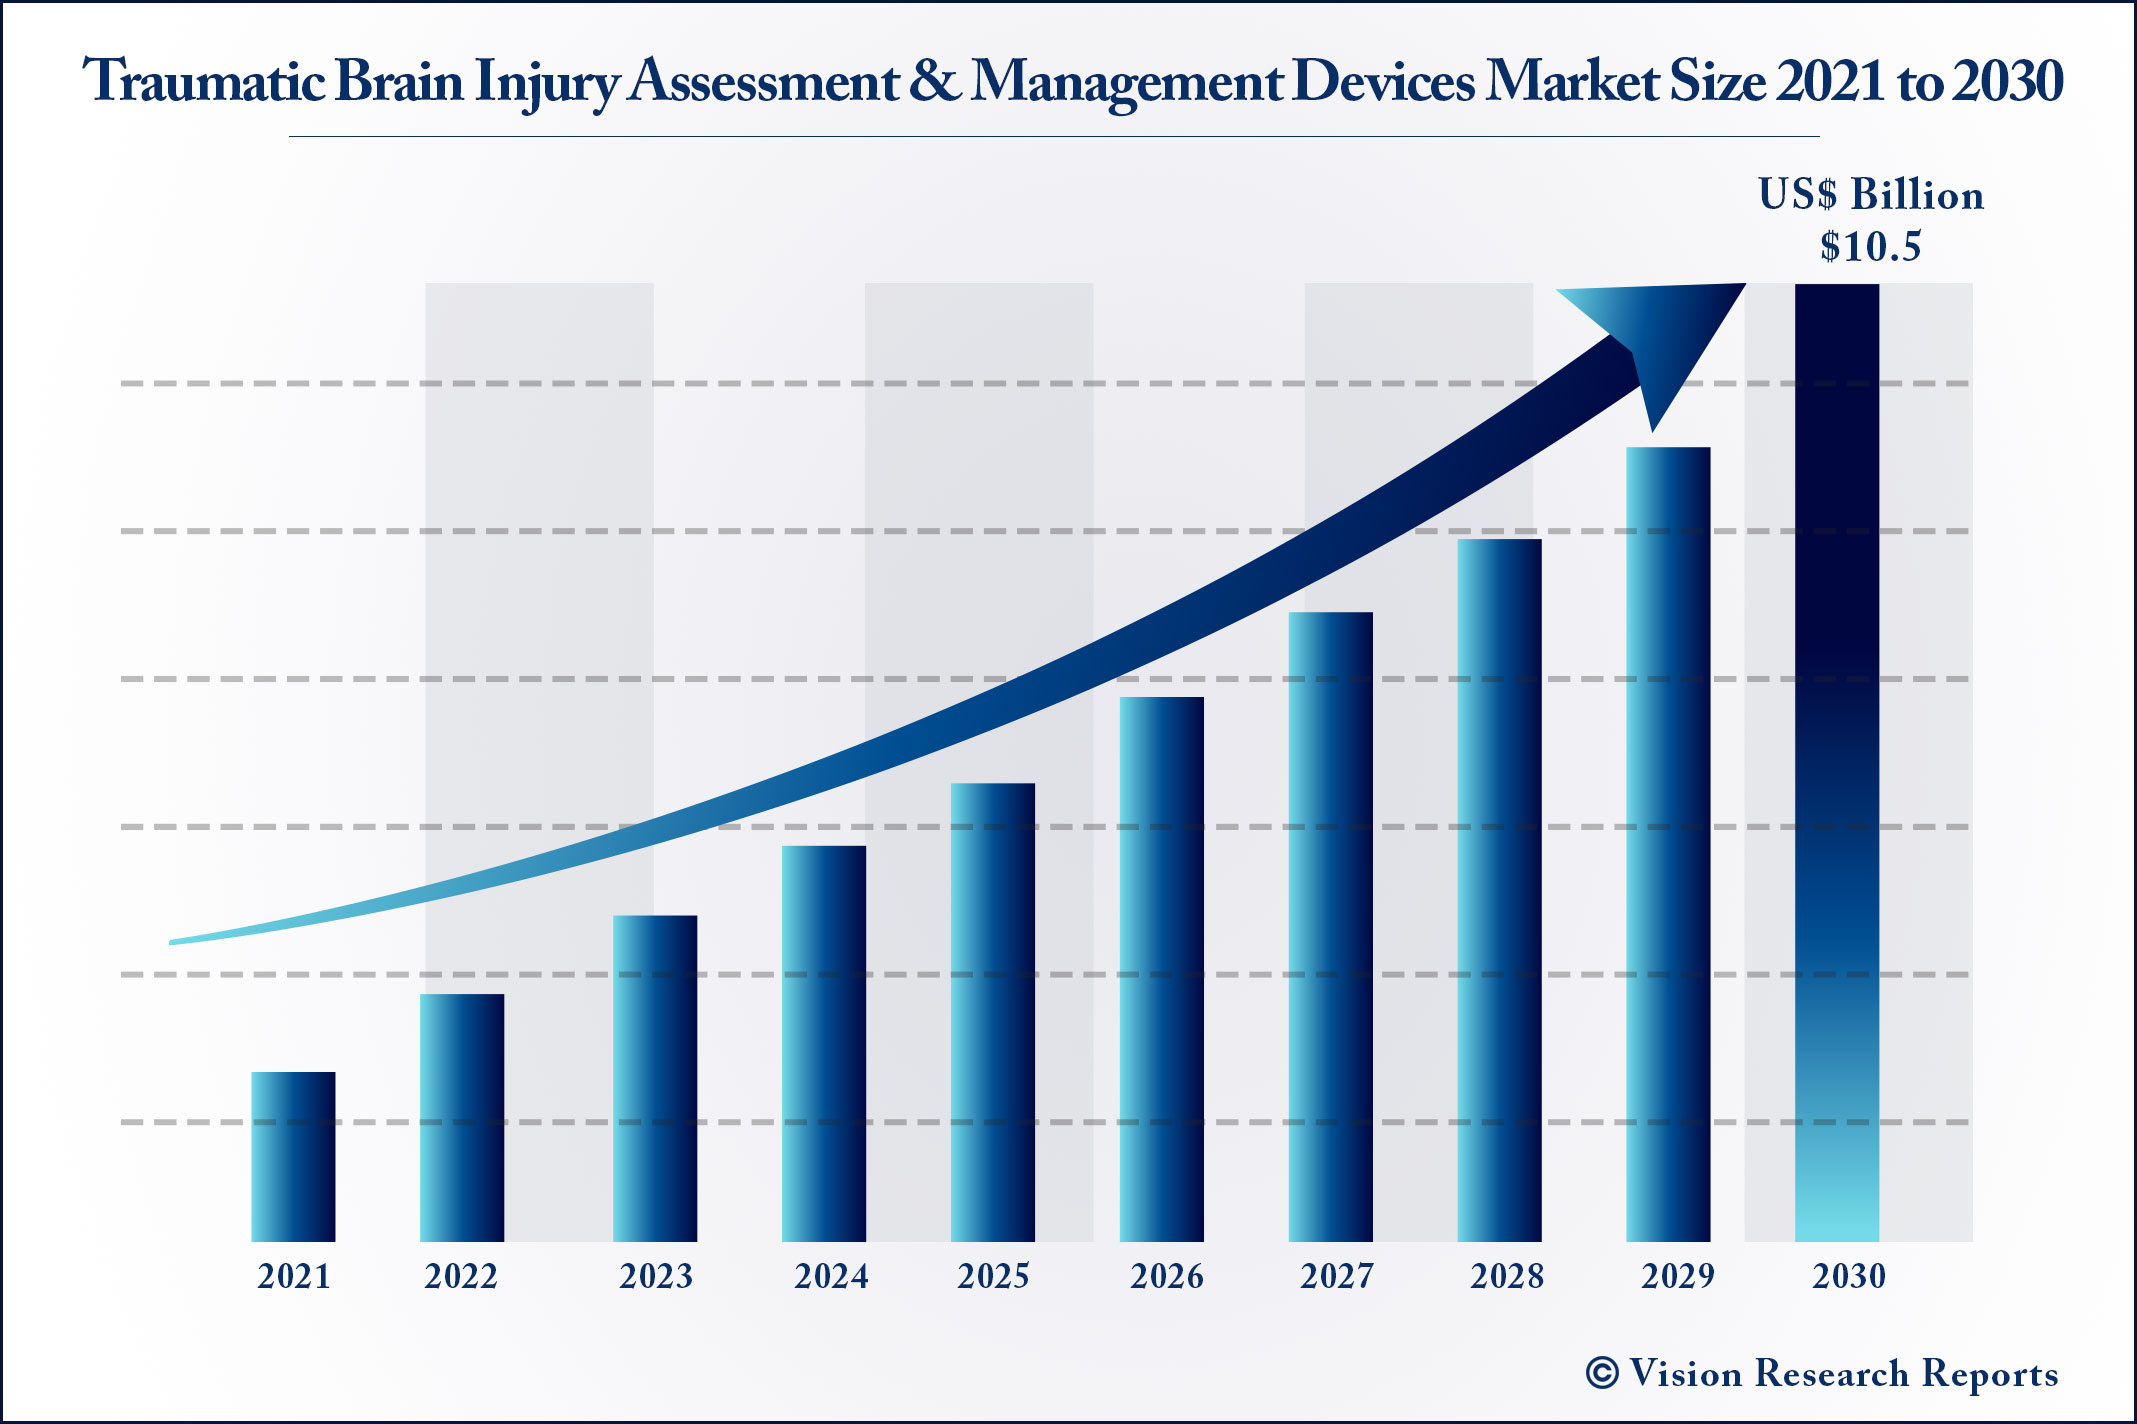 Traumatic Brain Injury Assessment & Management Devices Market Size 2021 to 2030